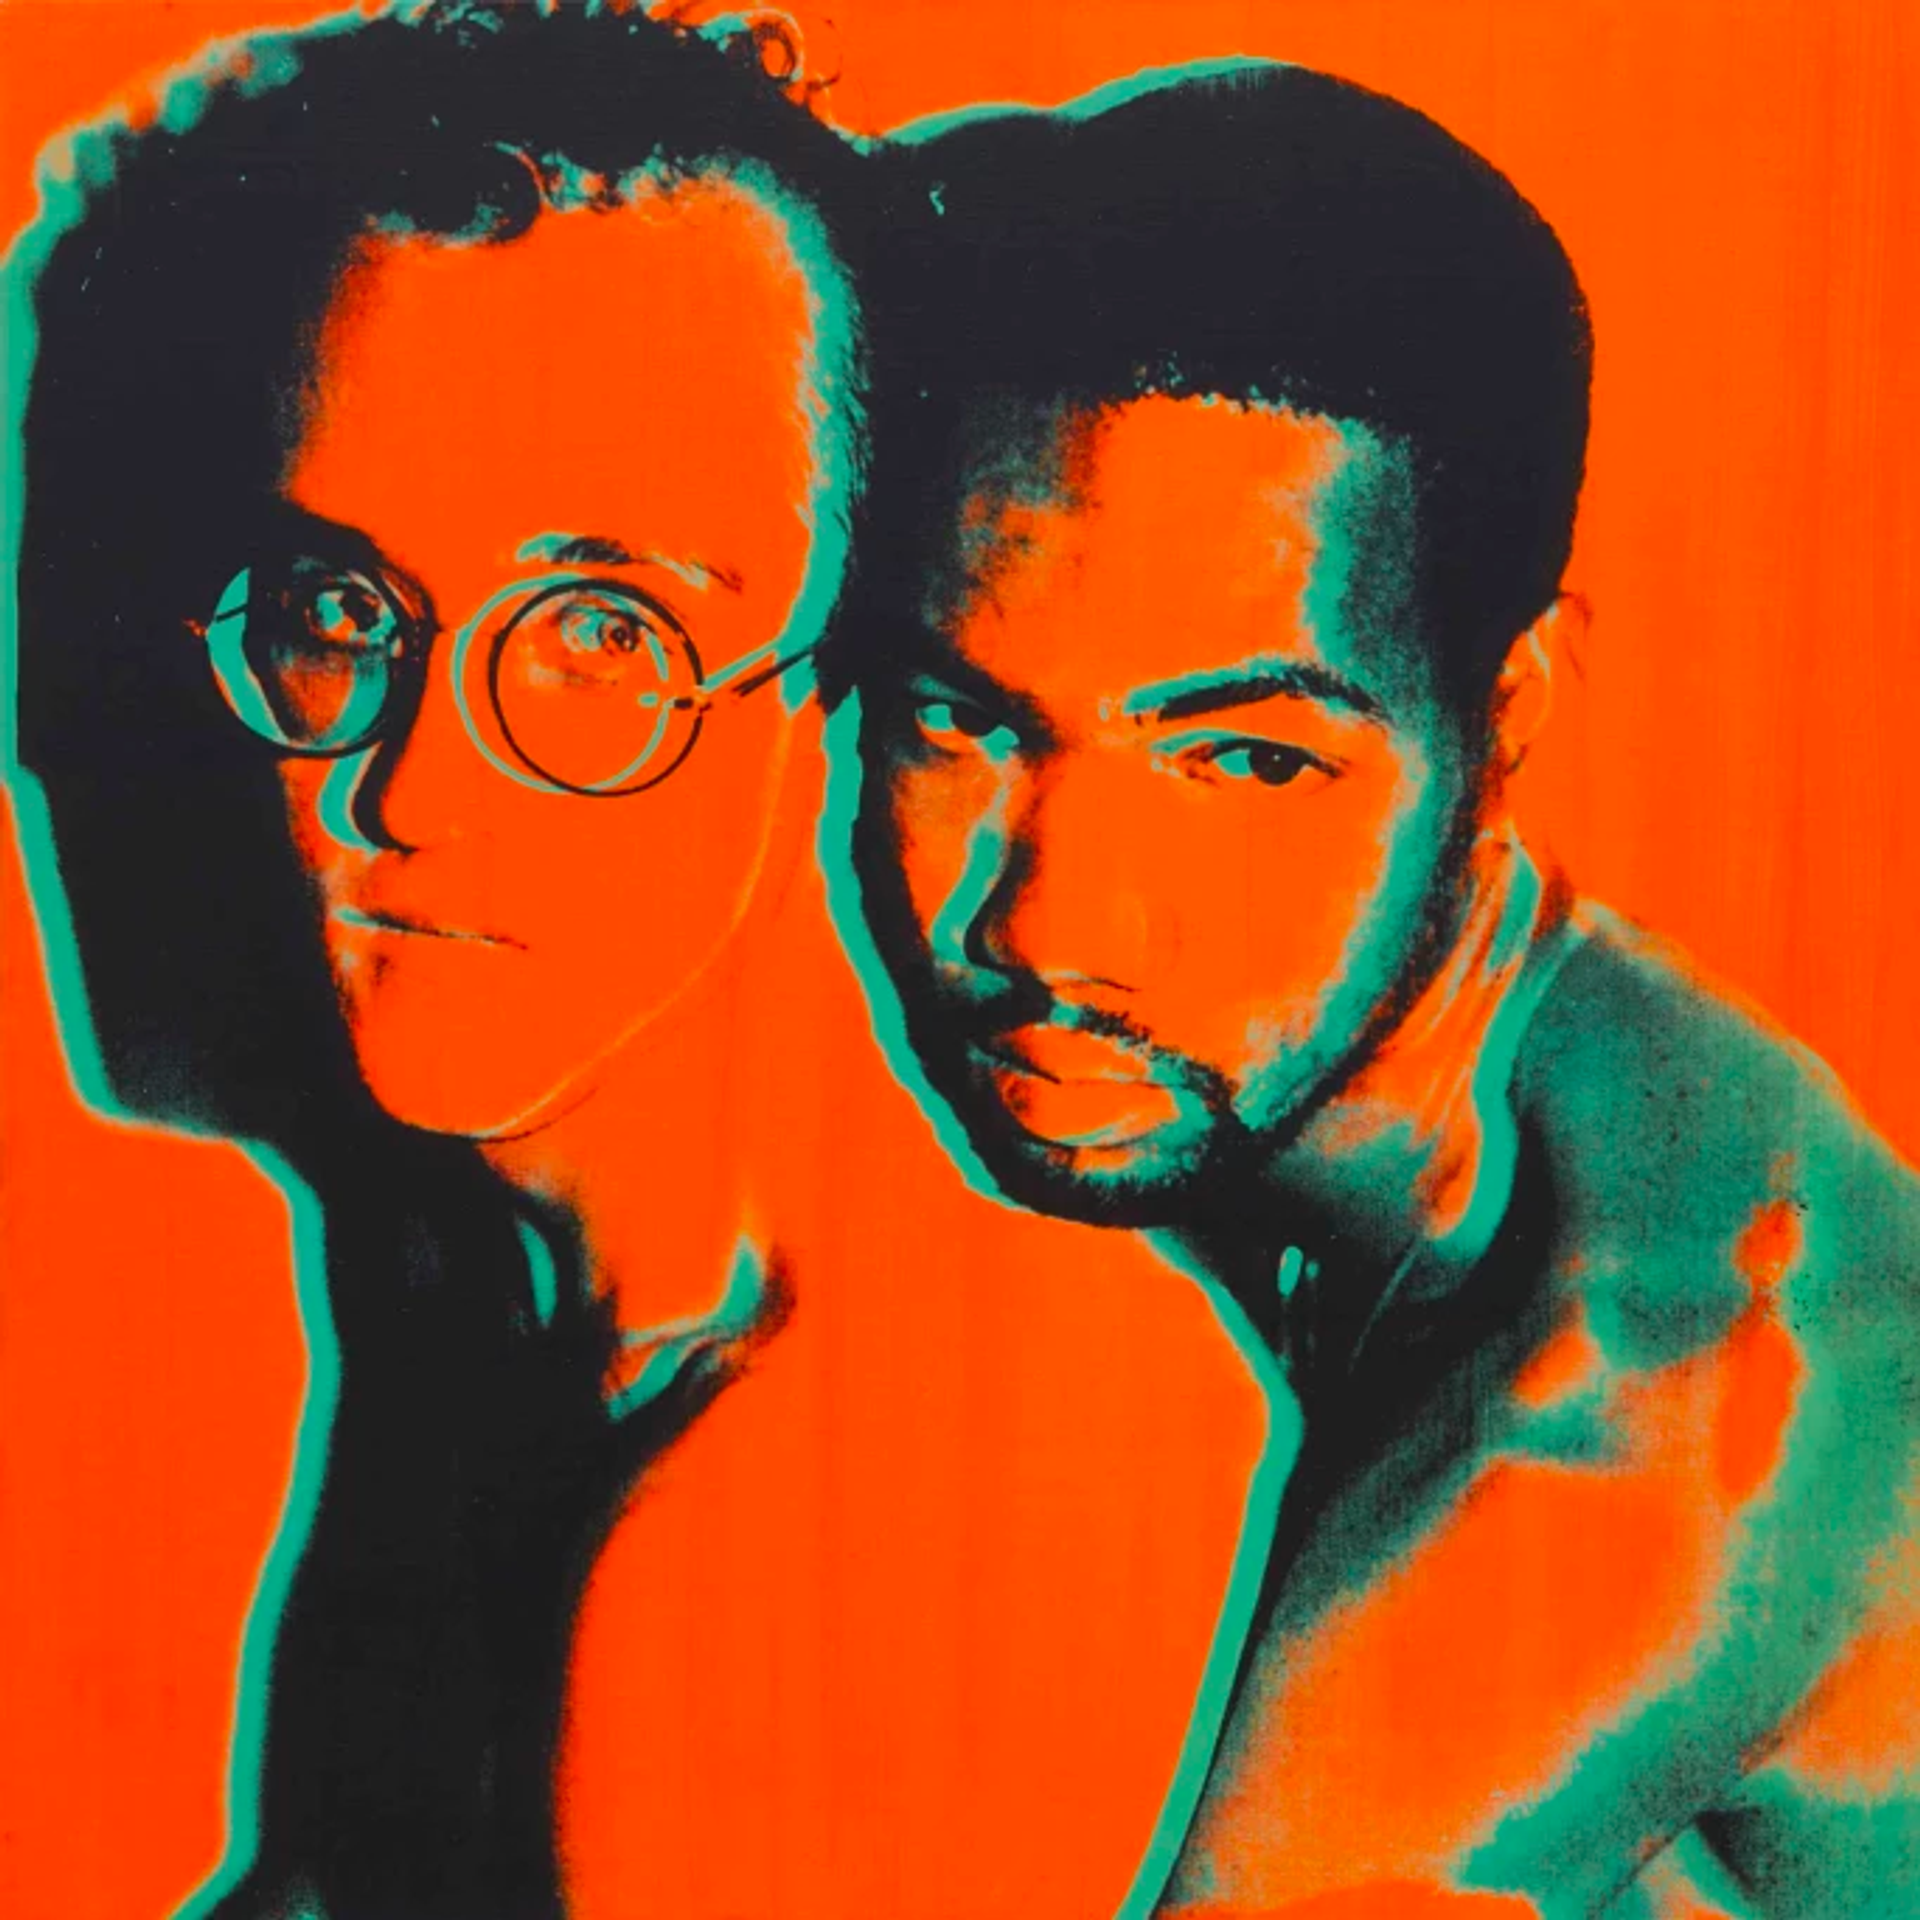 A vibrant screenprint image featuring Keith Haring and Juan Dubose. The artwork showcases an embrace between the two figures as Juan Dubose hugs Keith Haring from behind. Both individuals have straight and sensual expressions while looking directly at the camera. The image is predominantly colored in orange and green.